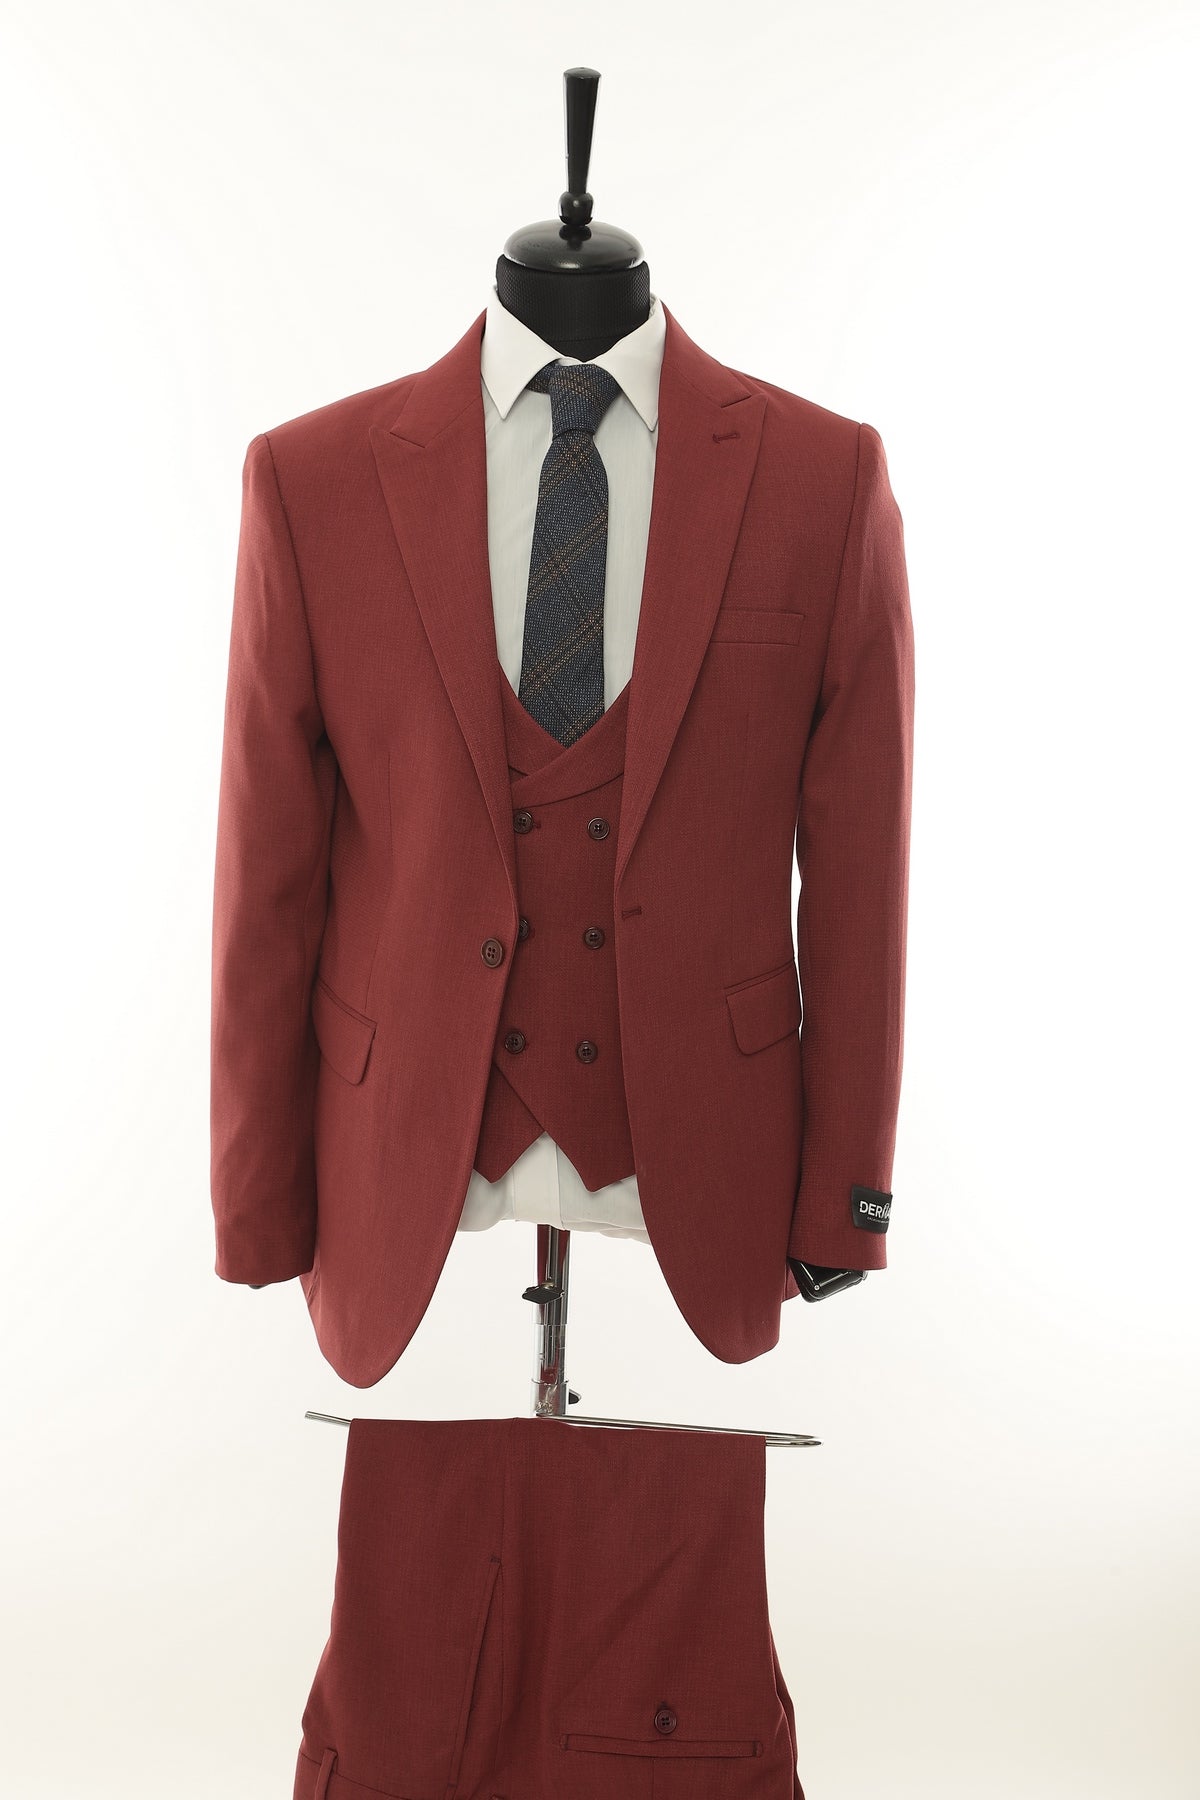 Burgundy Patterned Fabric Luxury Suit 3 Pieces